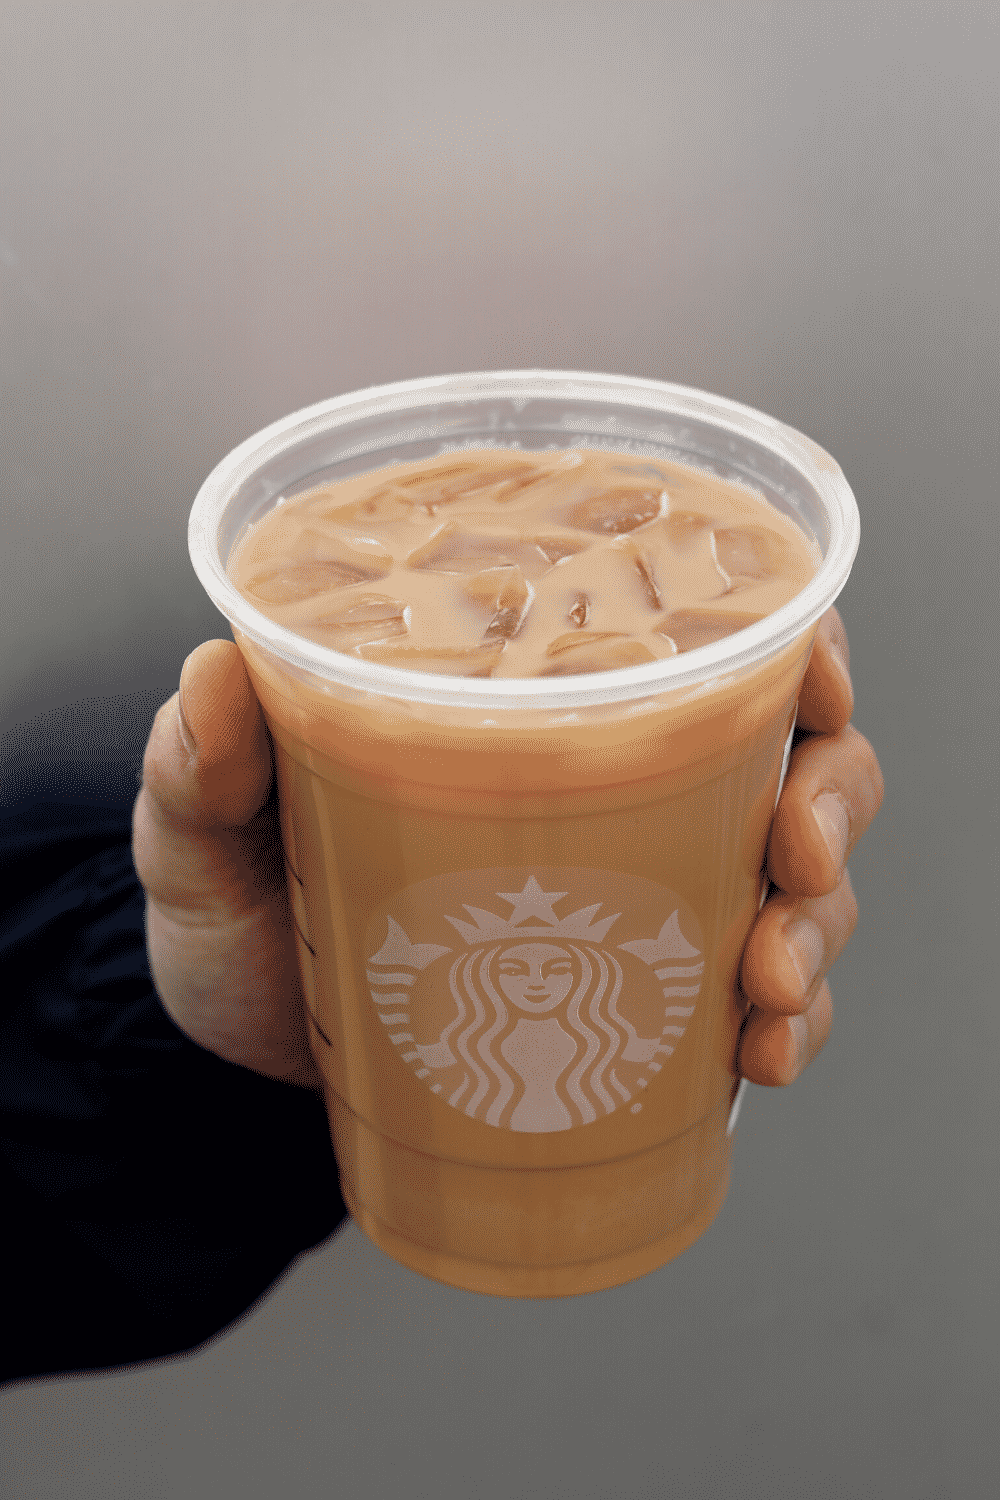 A hand holding a cup of Starbucks vegan iced Caffe latte